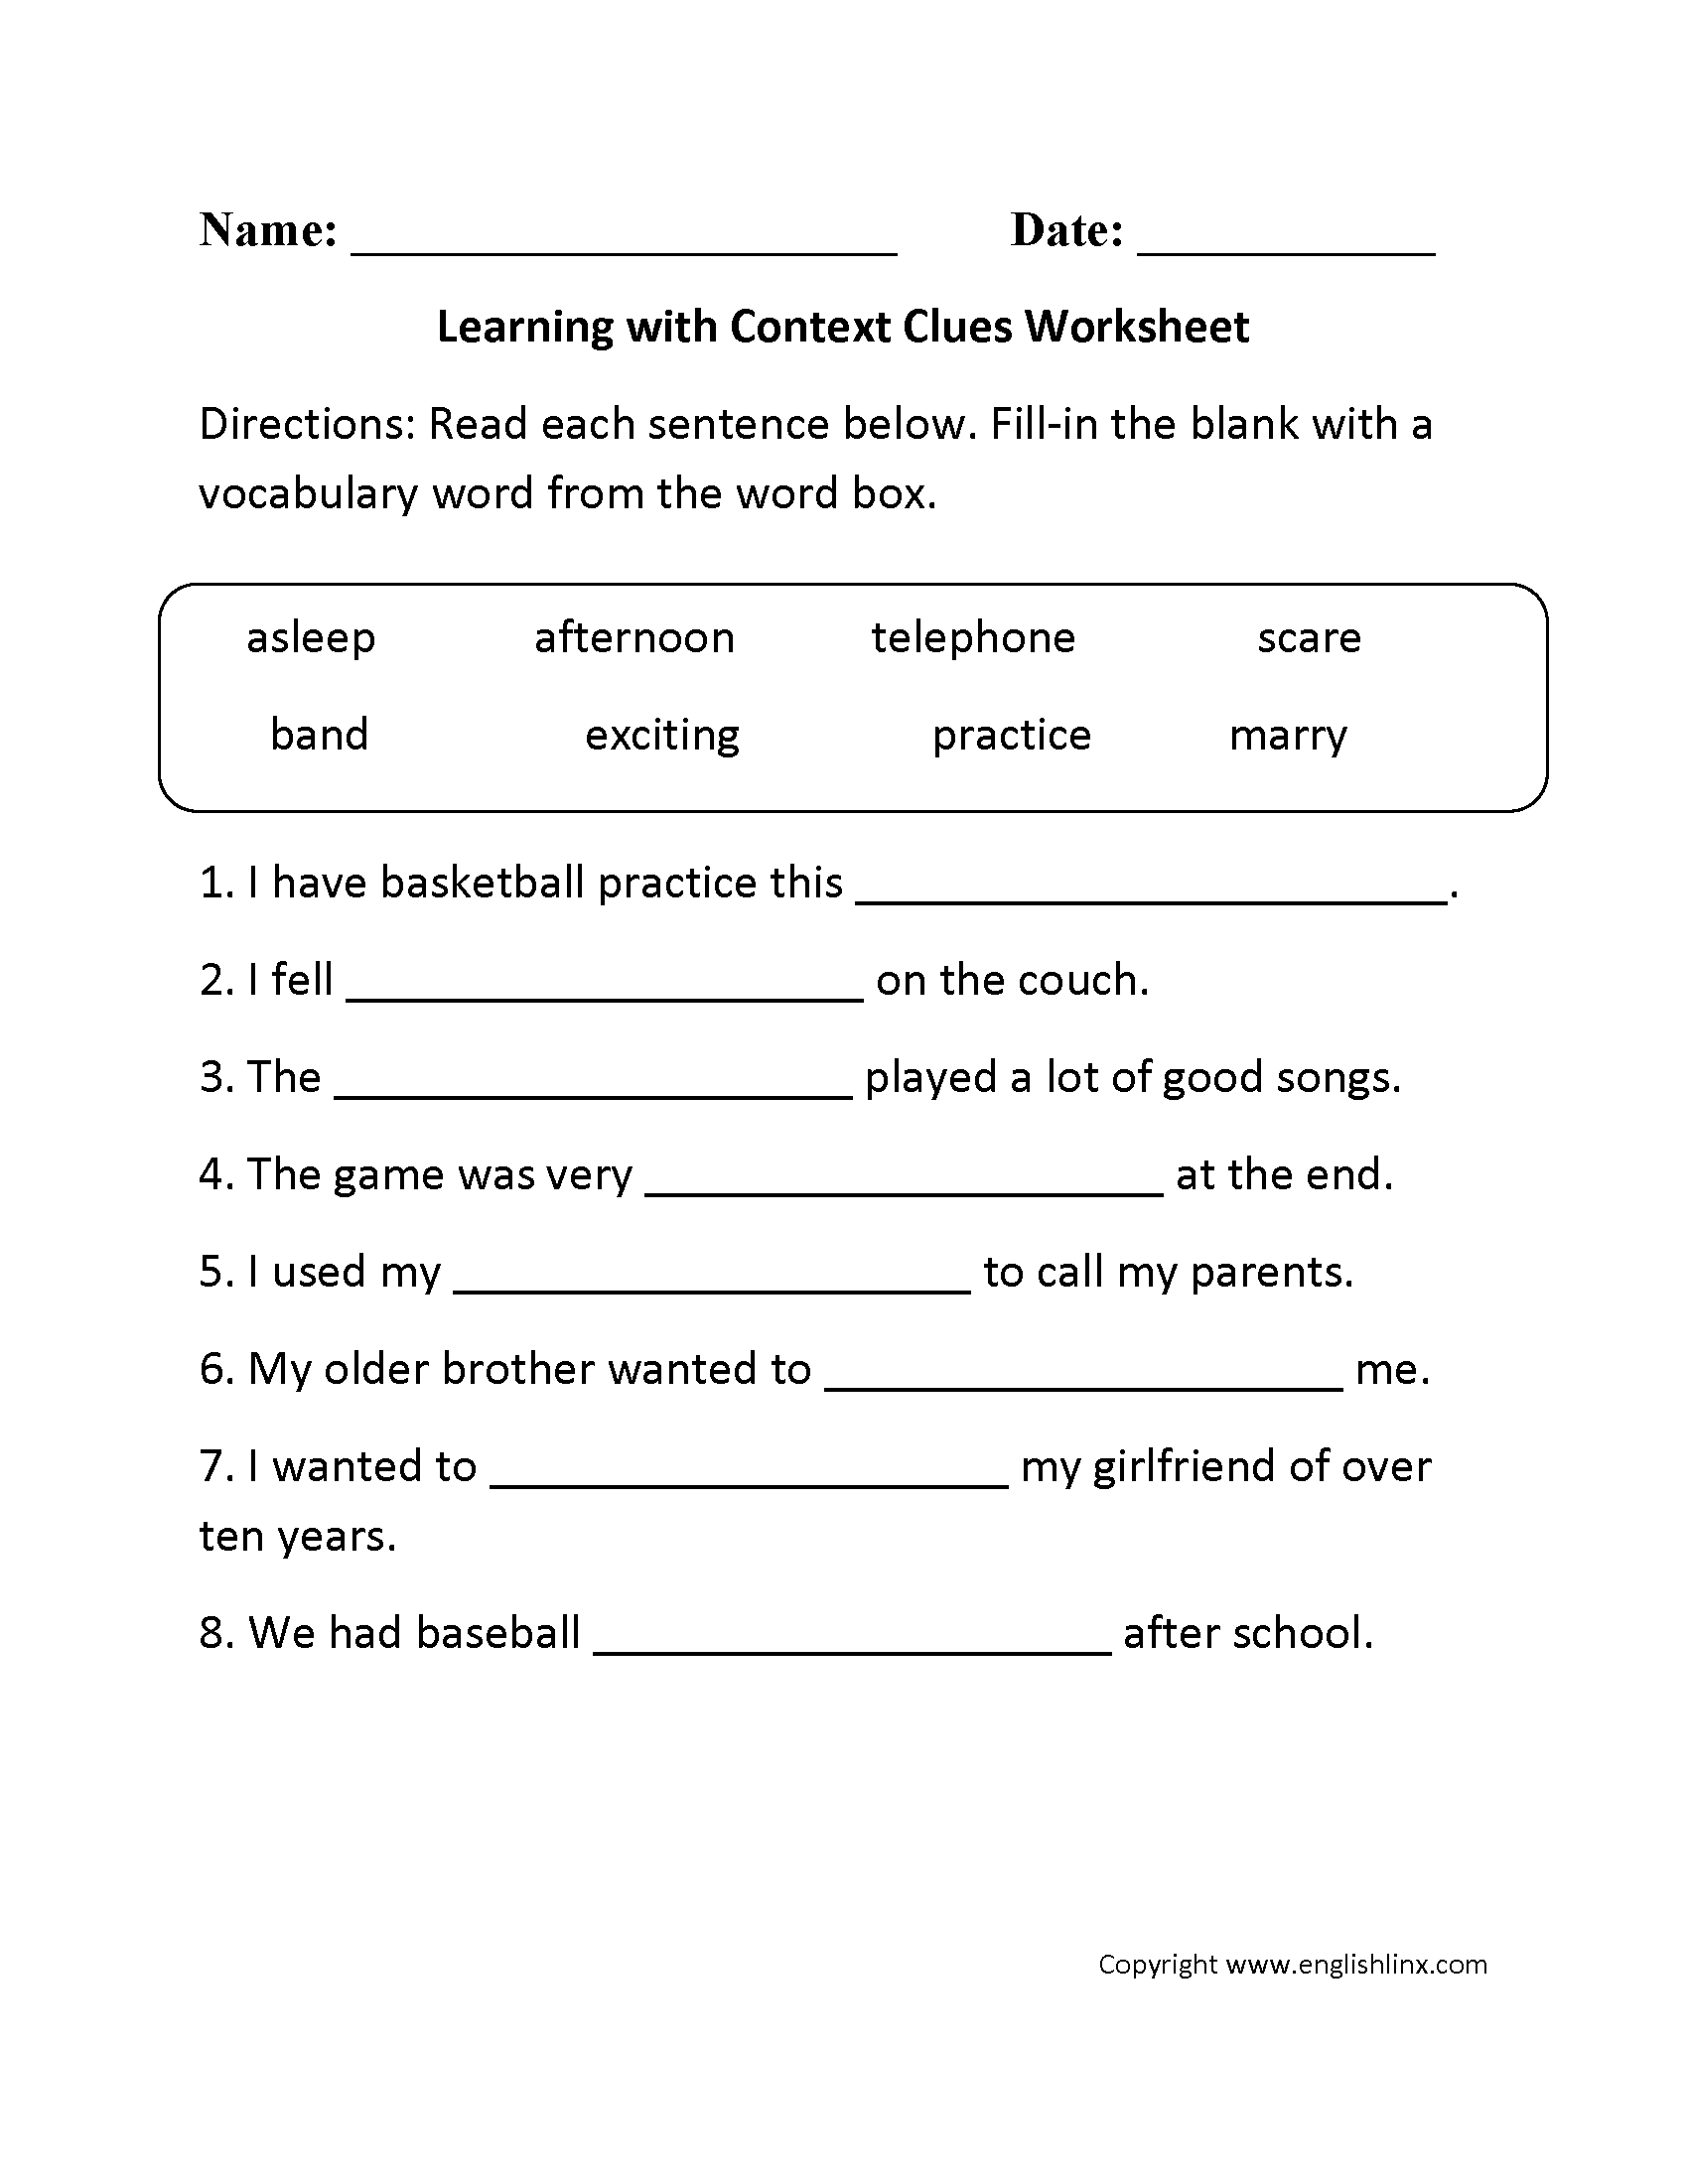 Learning with Context Clues Worksheet